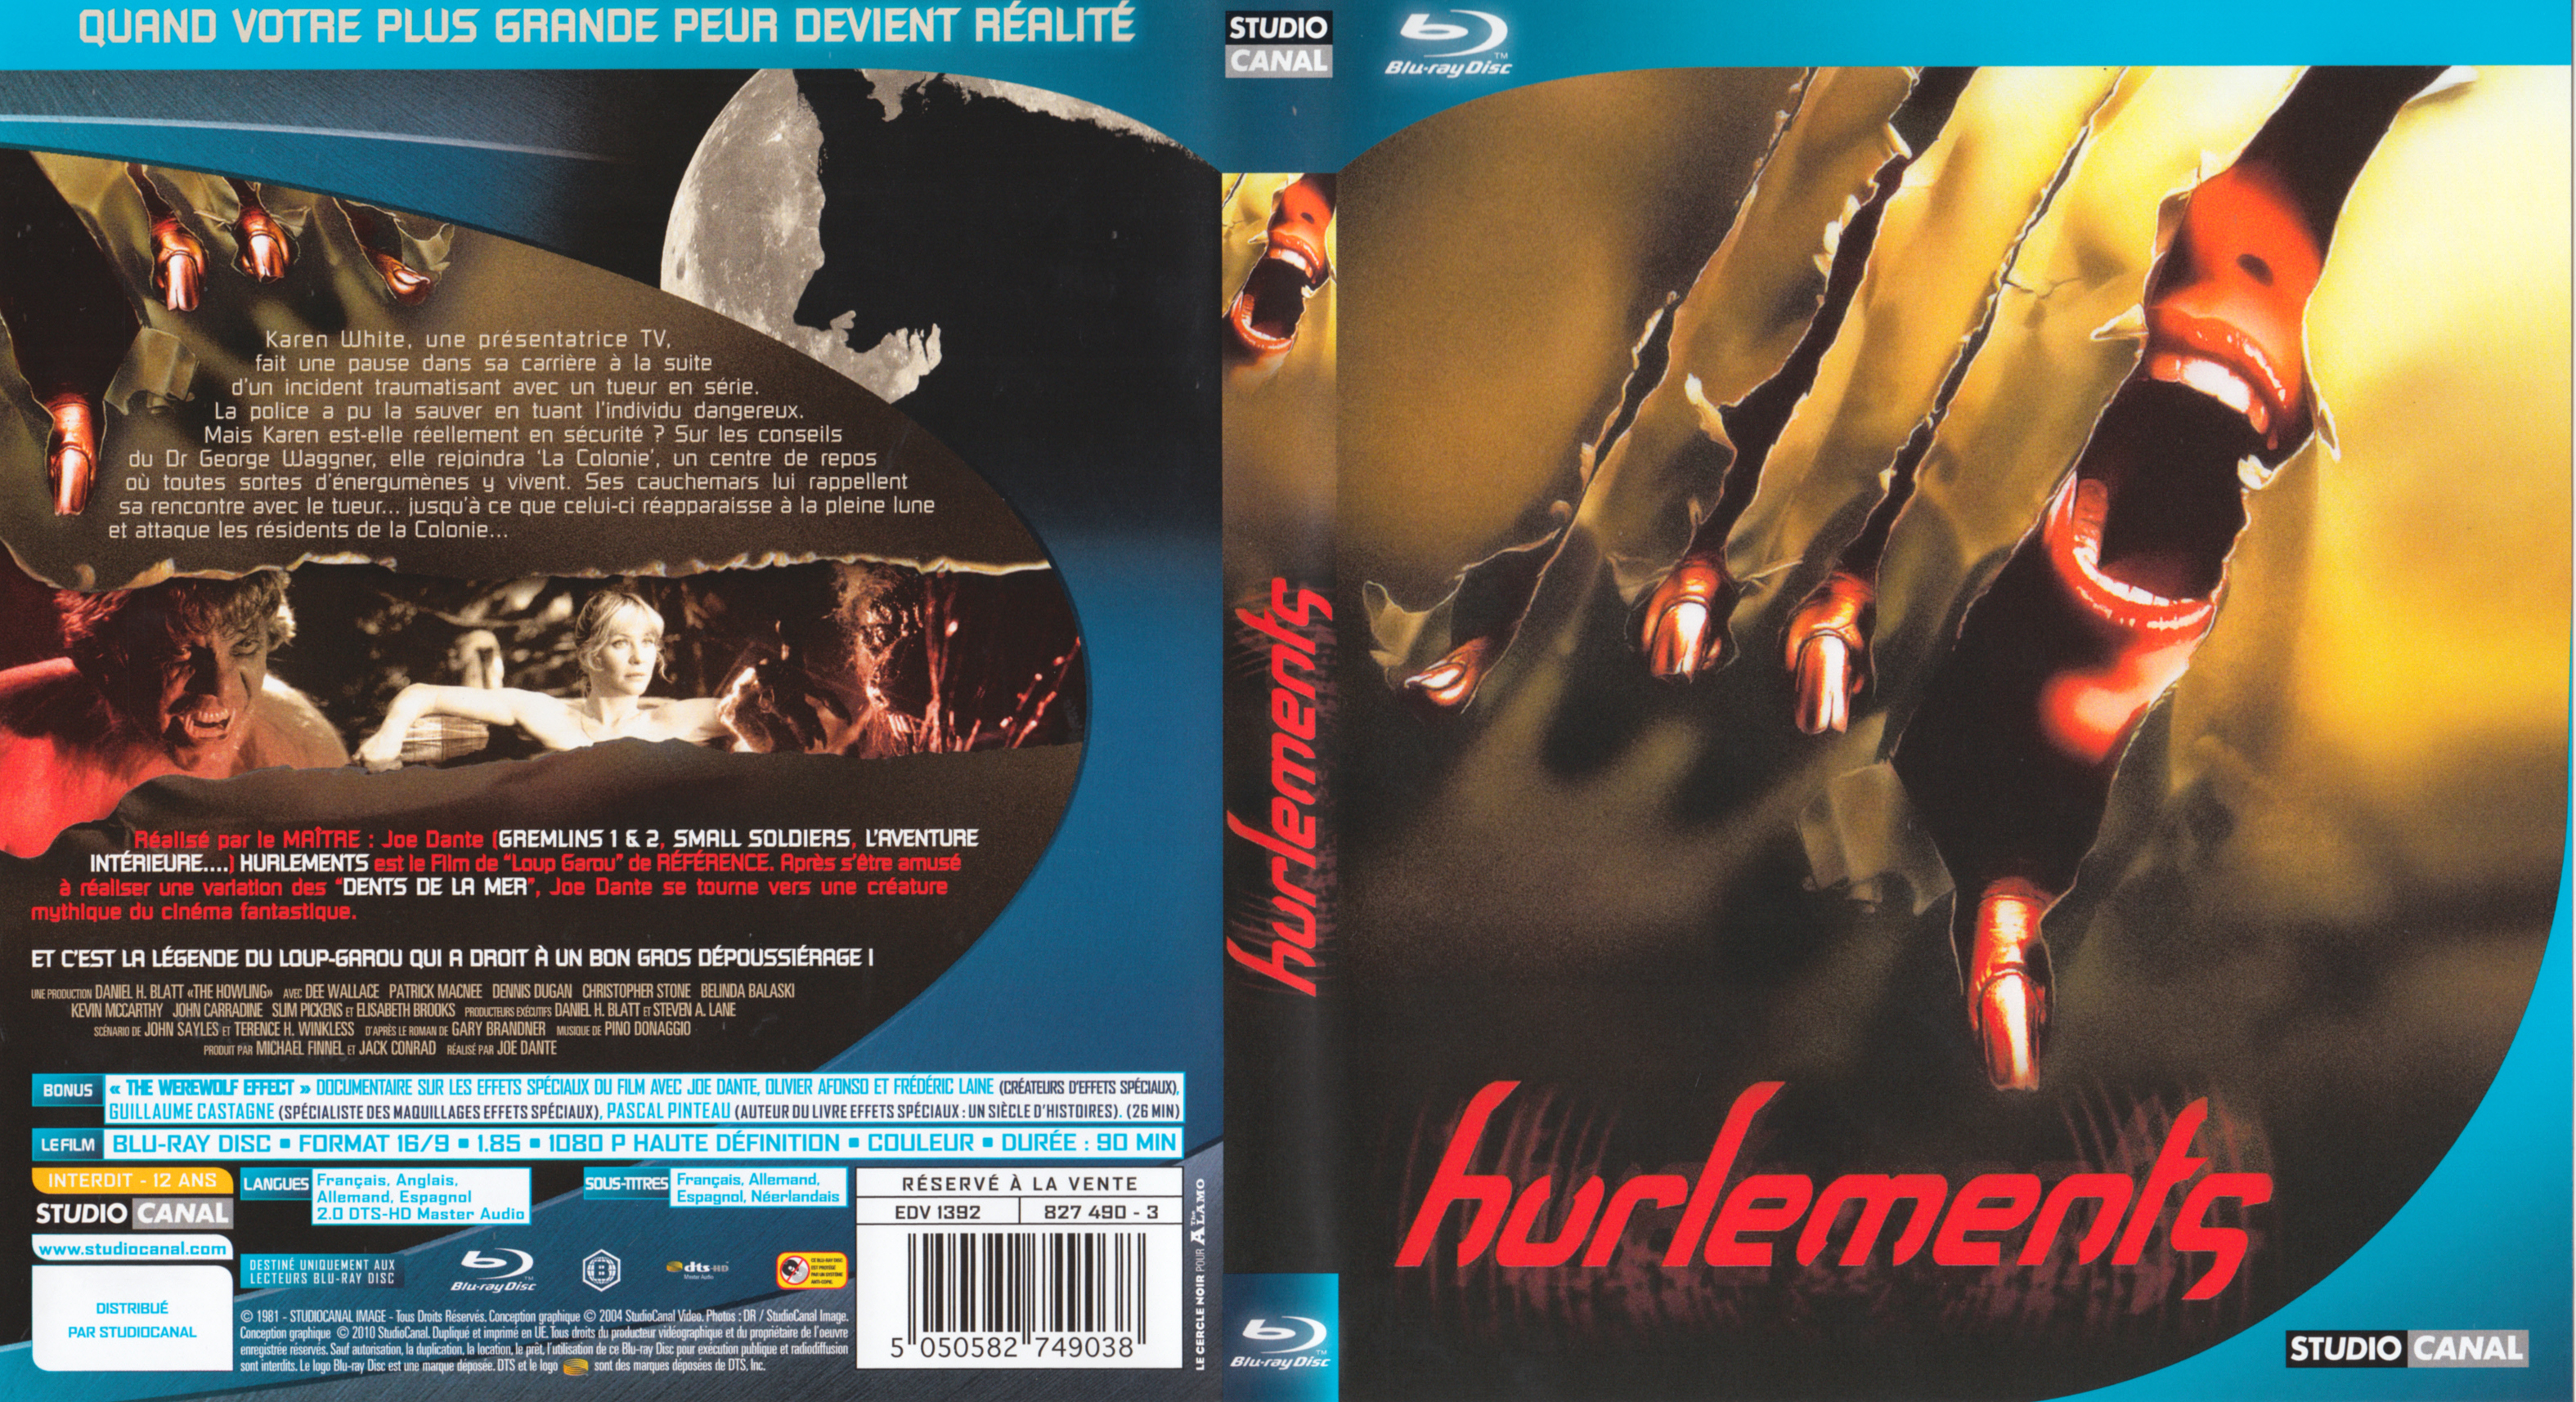 Jaquette DVD Hurlements (BLU-RAY)